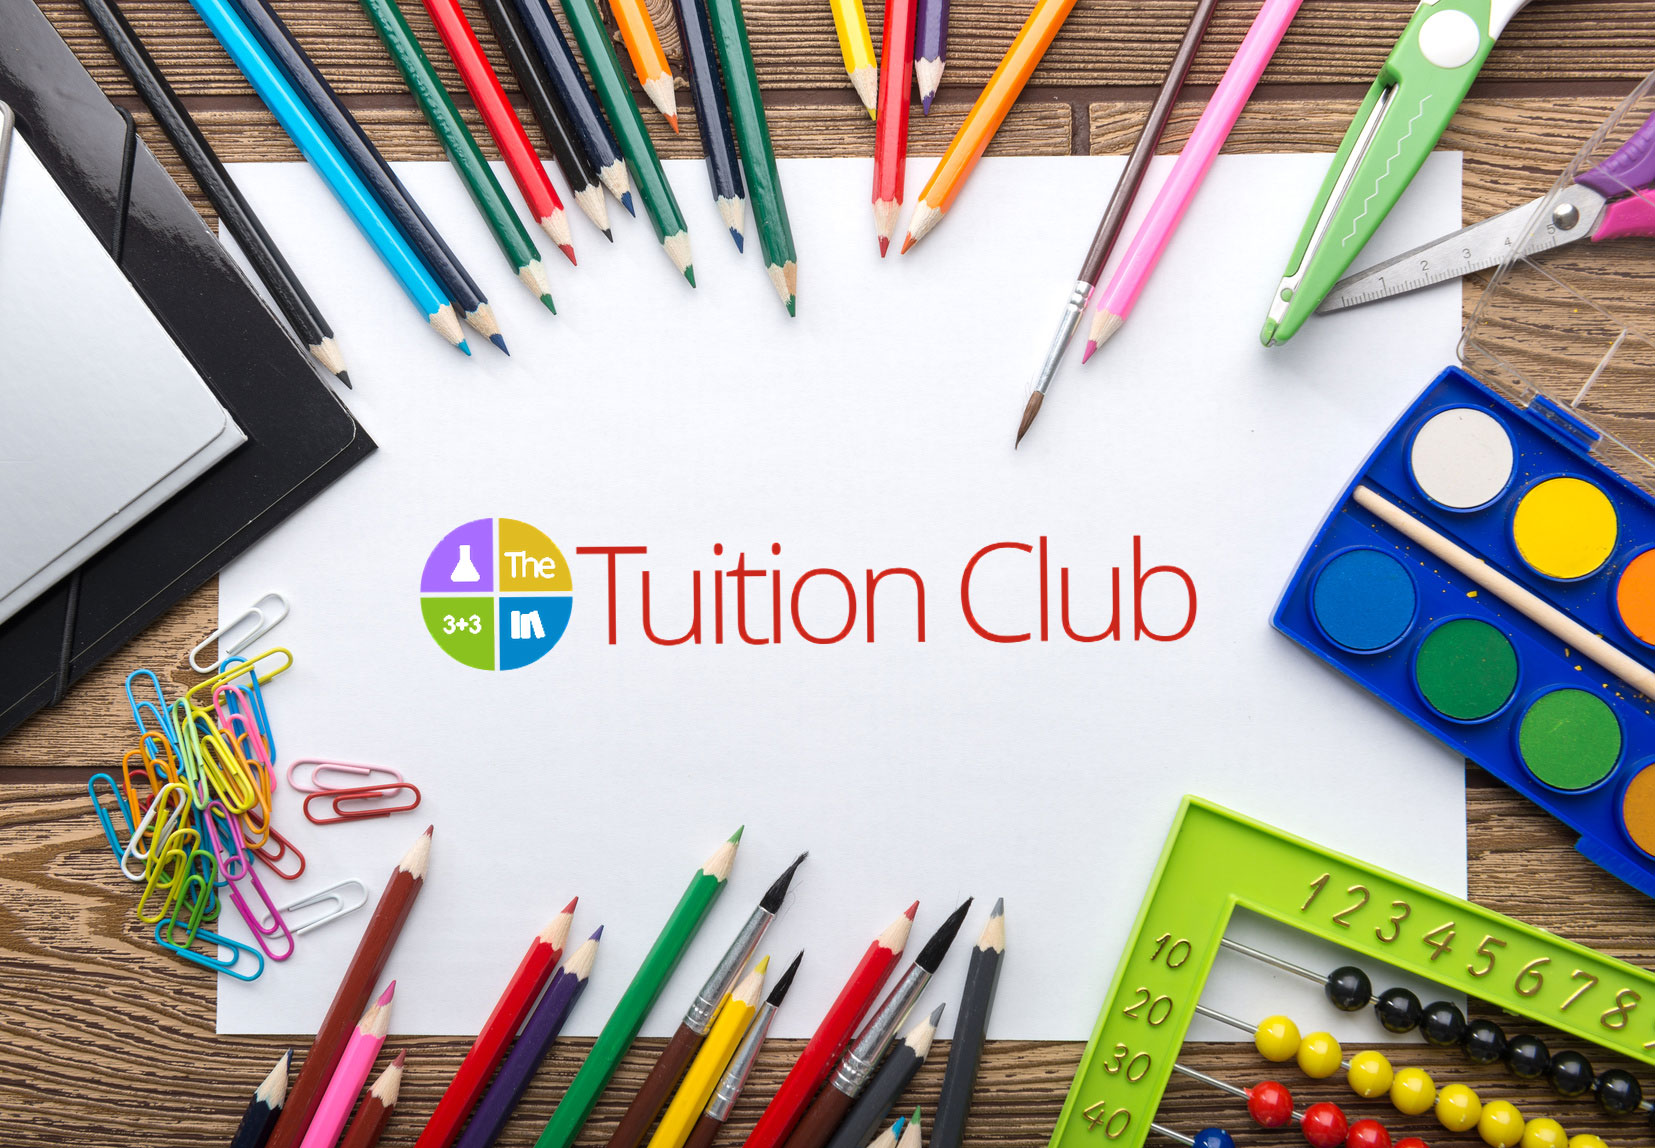 Welcome to The Tuition Club